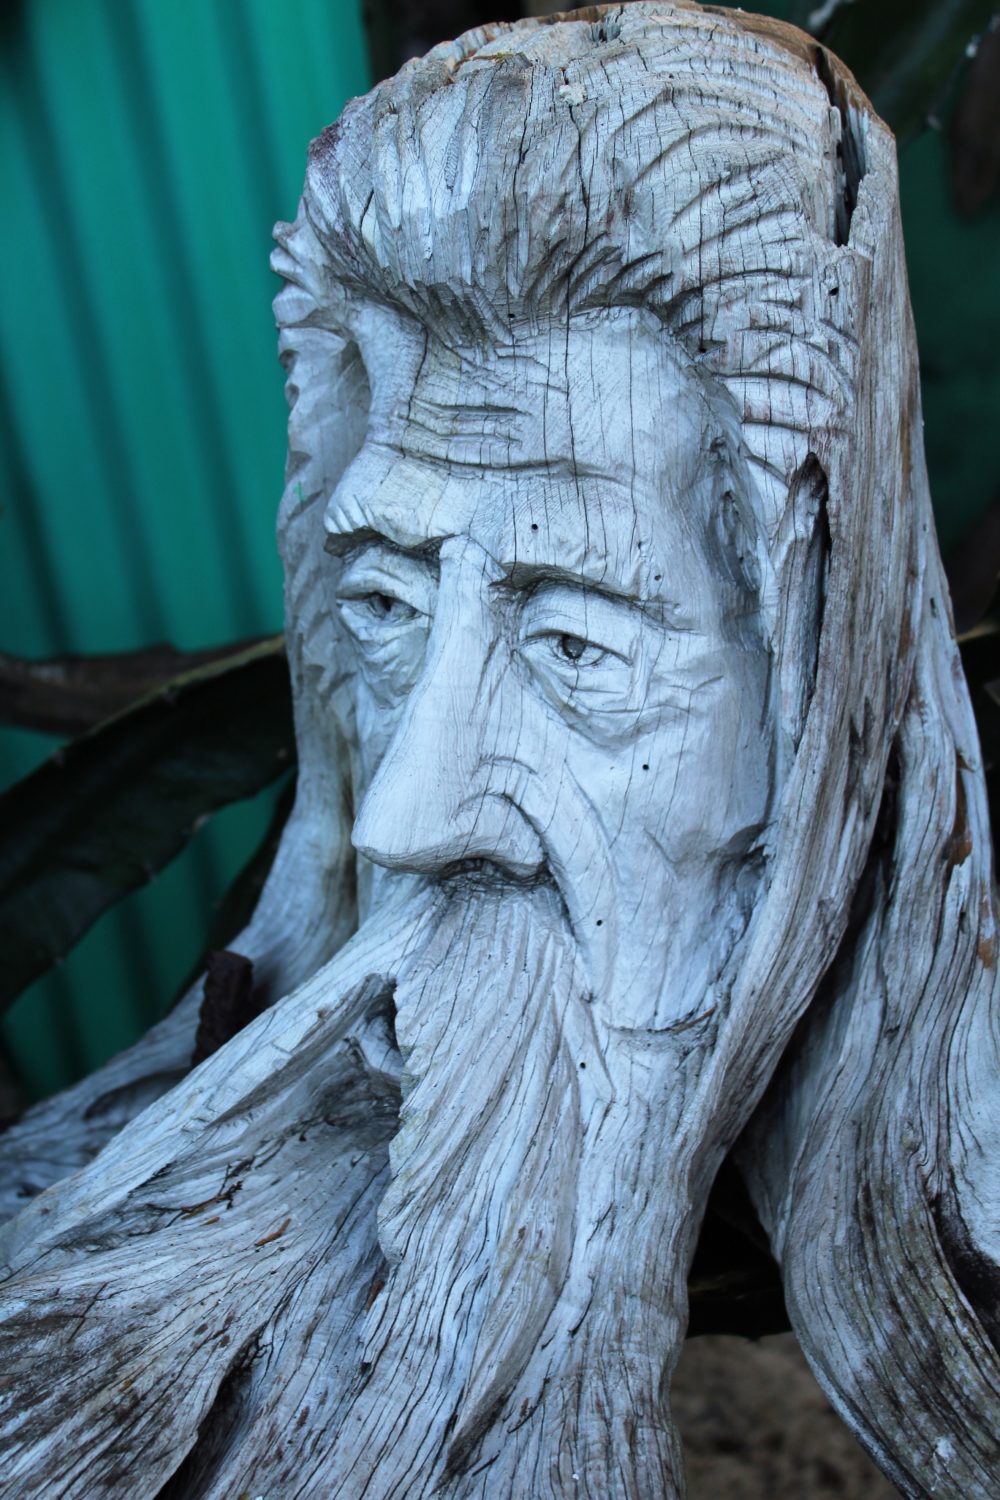 Peter also carves amazing wizards and curious creatures, working with the shape of the driftwood.